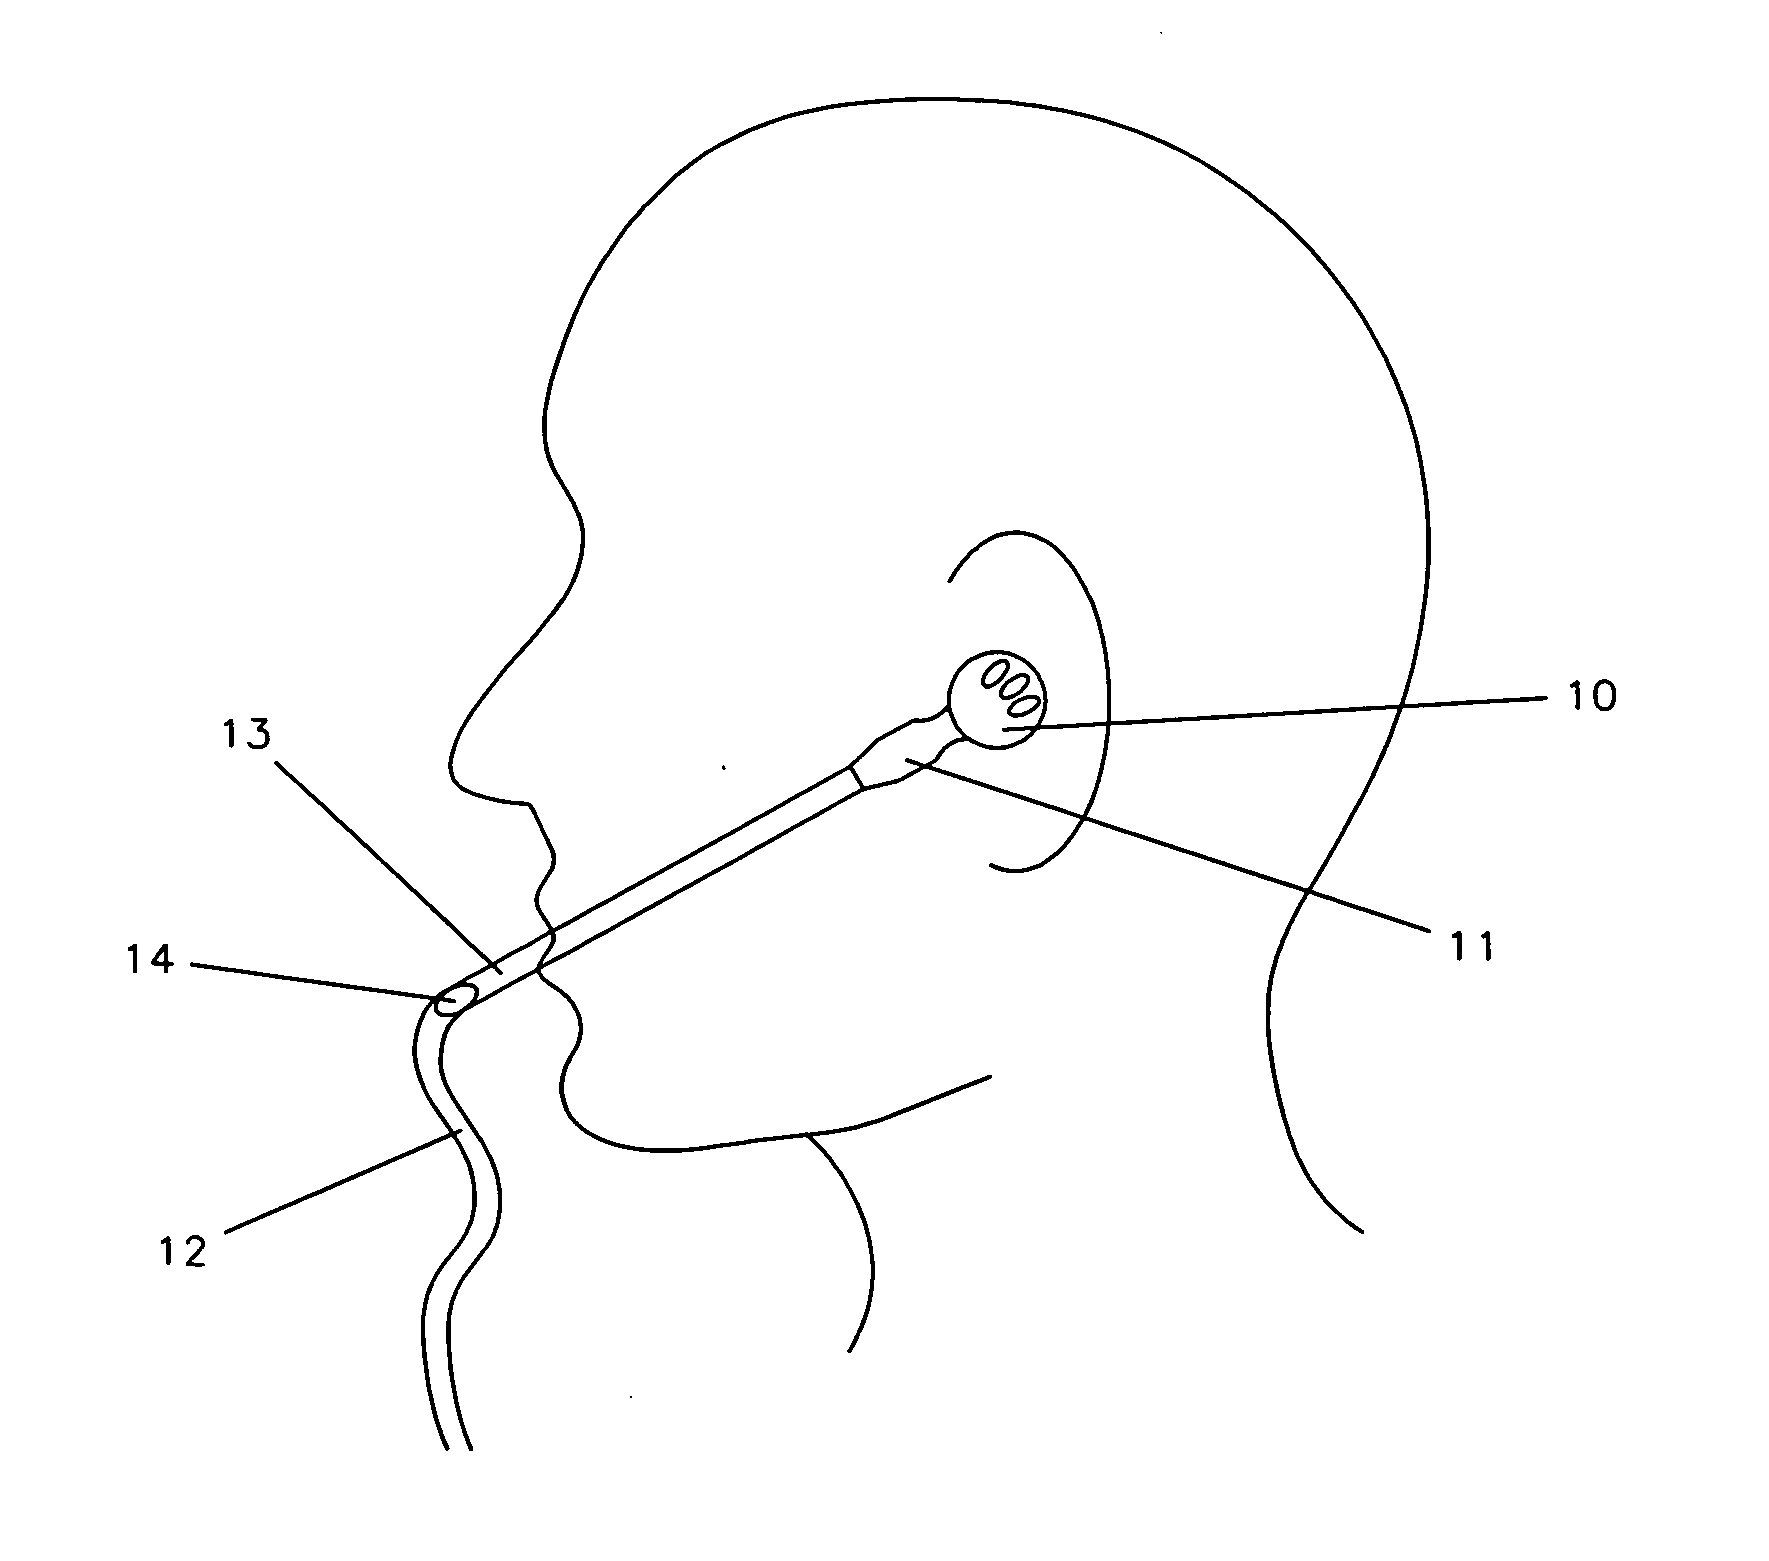 Headset for communication devices